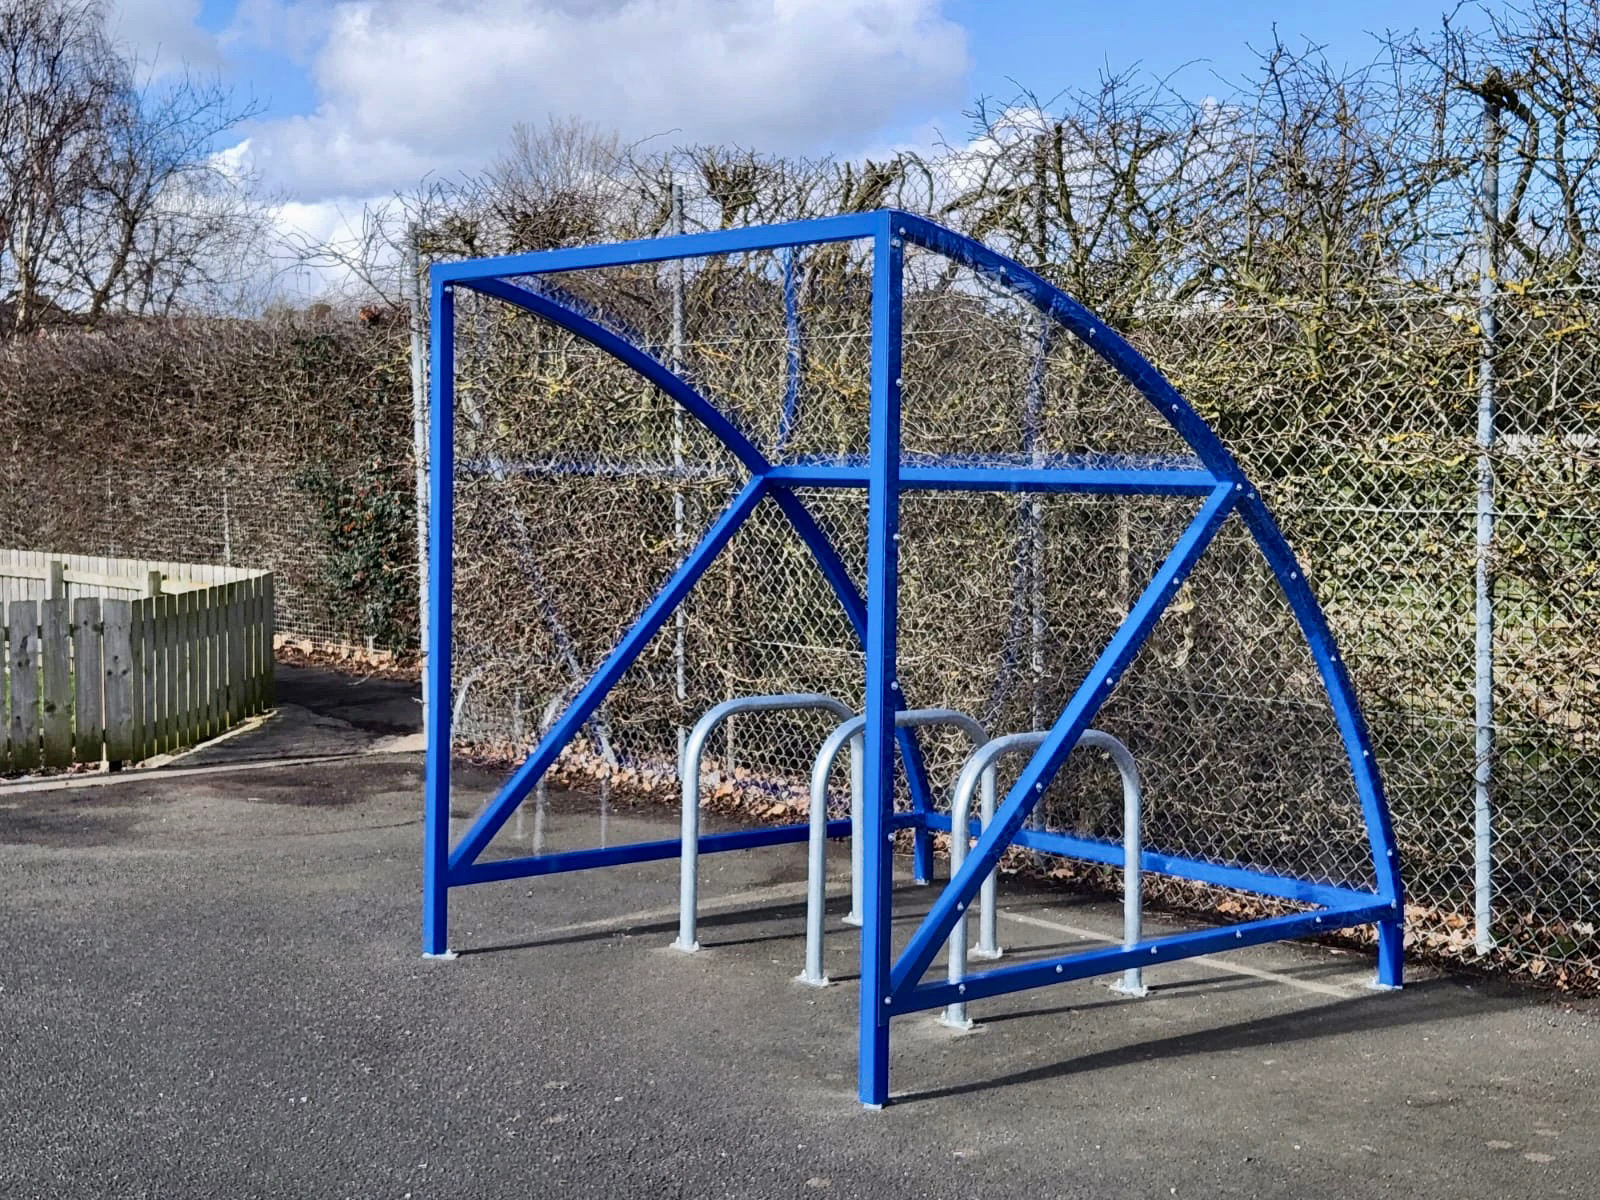 6 space original cycle shelter with galvanised Sheffield stands